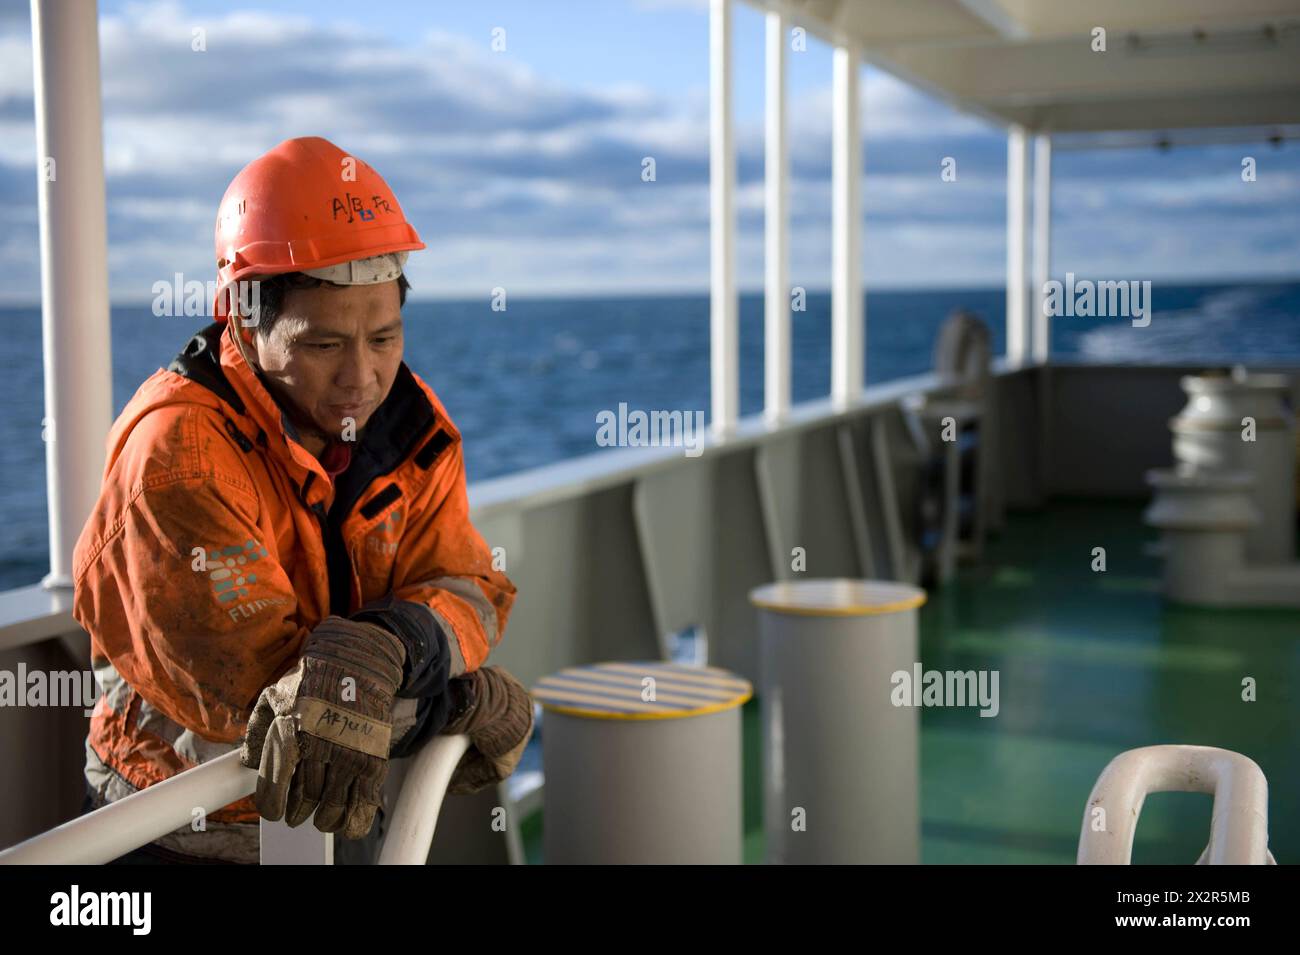 Able Seasman on Deck Able Seaman from the Philippines on Deck of Container Vessel MS Flintercape during a voyage from Port of Rotterdam Harbour towards the Docks of Sundsvall, Sweden. MRYES Rotterdam NLD - Sundsvall SE Containervessel MS Flintercape Noordzee, Baltische Zee, Golf va Netherlands Copyright: xGuidoxKoppesxPhotox Stock Photo